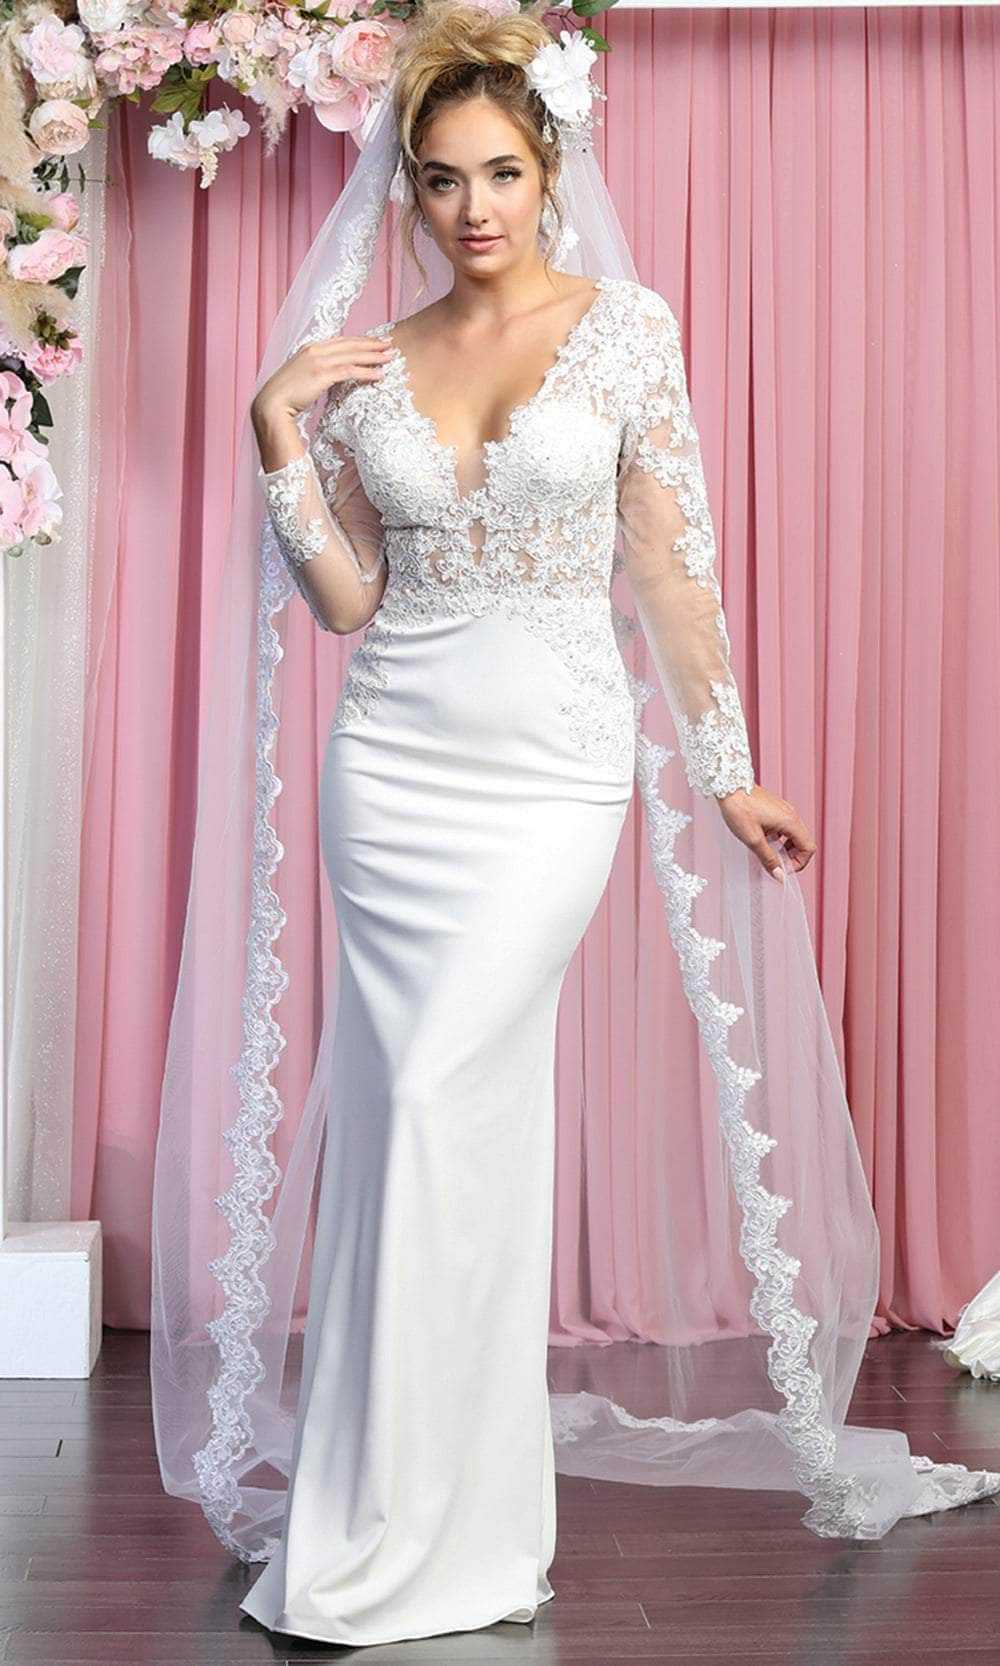 May Queen, May Queen RQ7901B - Long Sleeves V-neck Wedding Gown